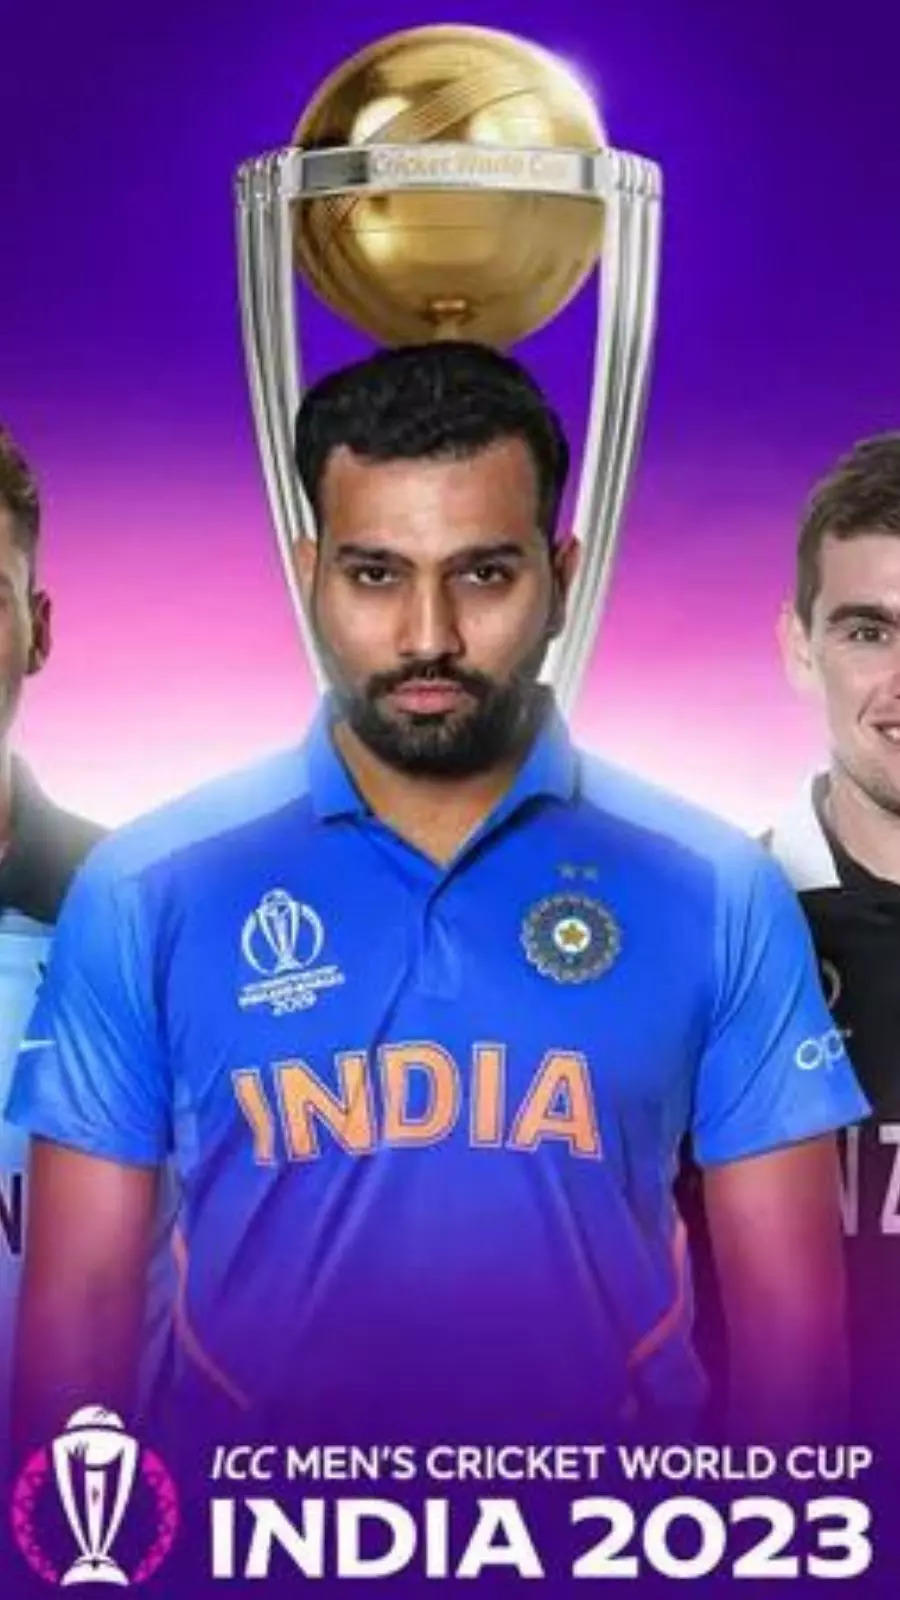 icc world cup schedule 2023 World Cup India vs Pakistan on Oct 15; full schedule of India matches EconomicTimes